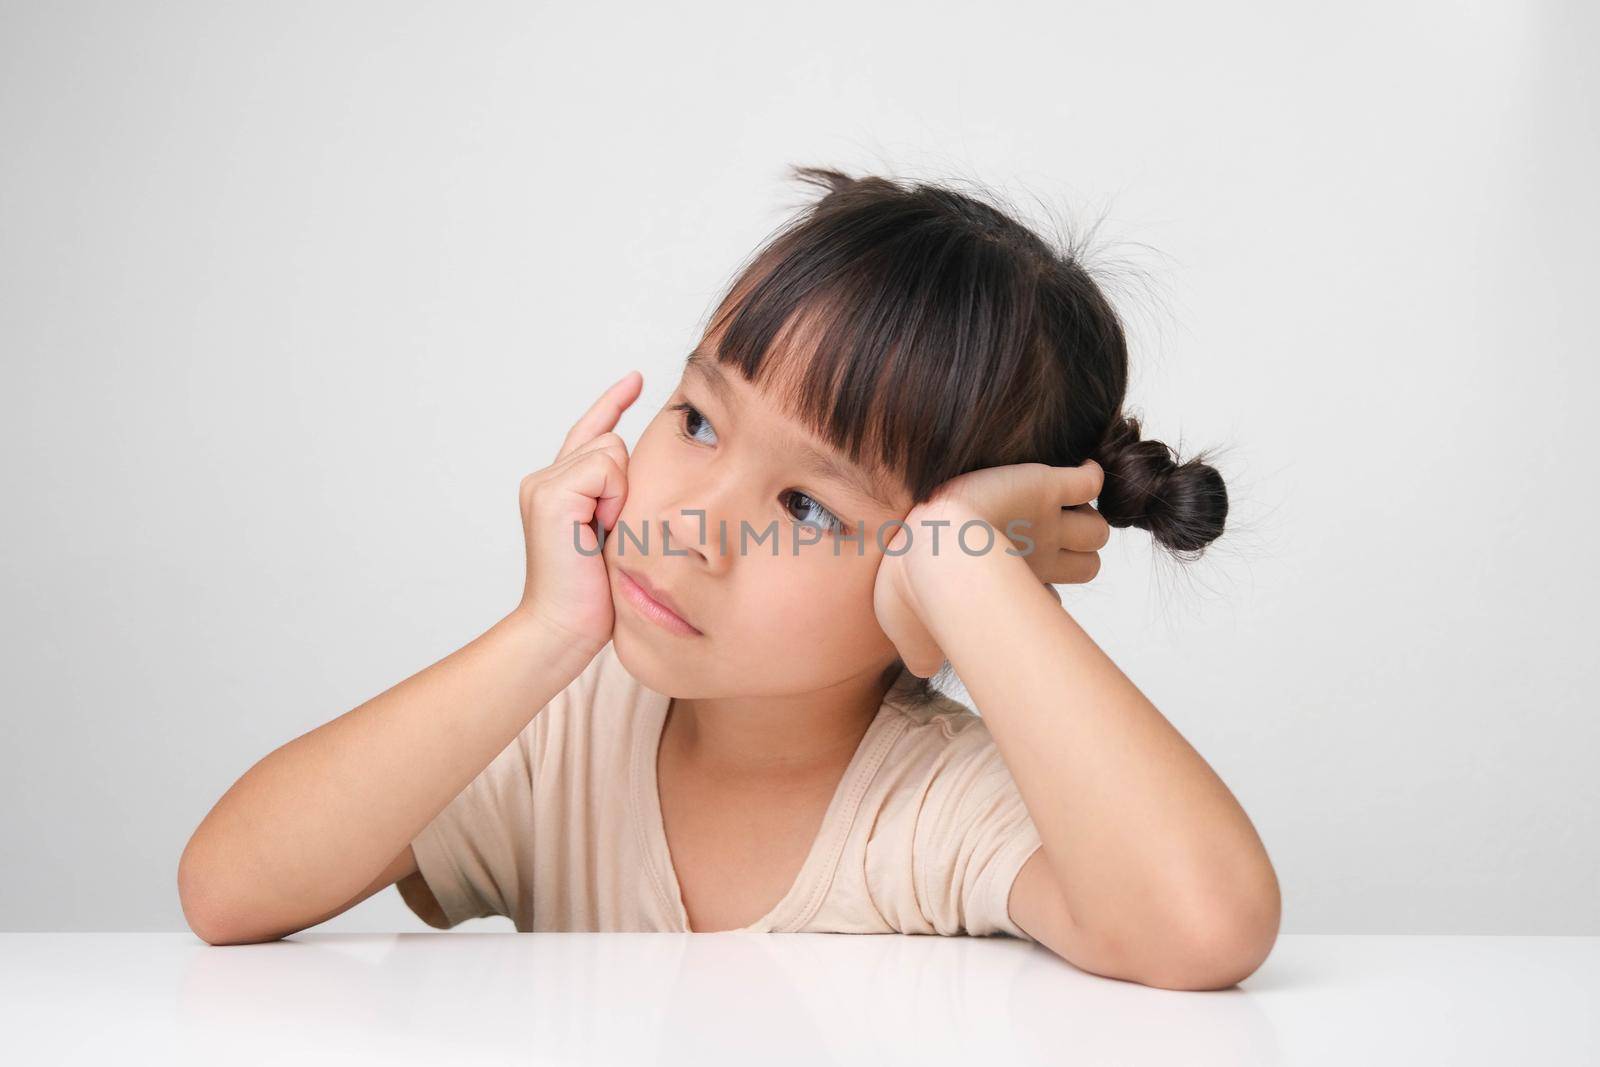 Cute dark haired little girl making a thoughtful pose sitting at a table on a white background.